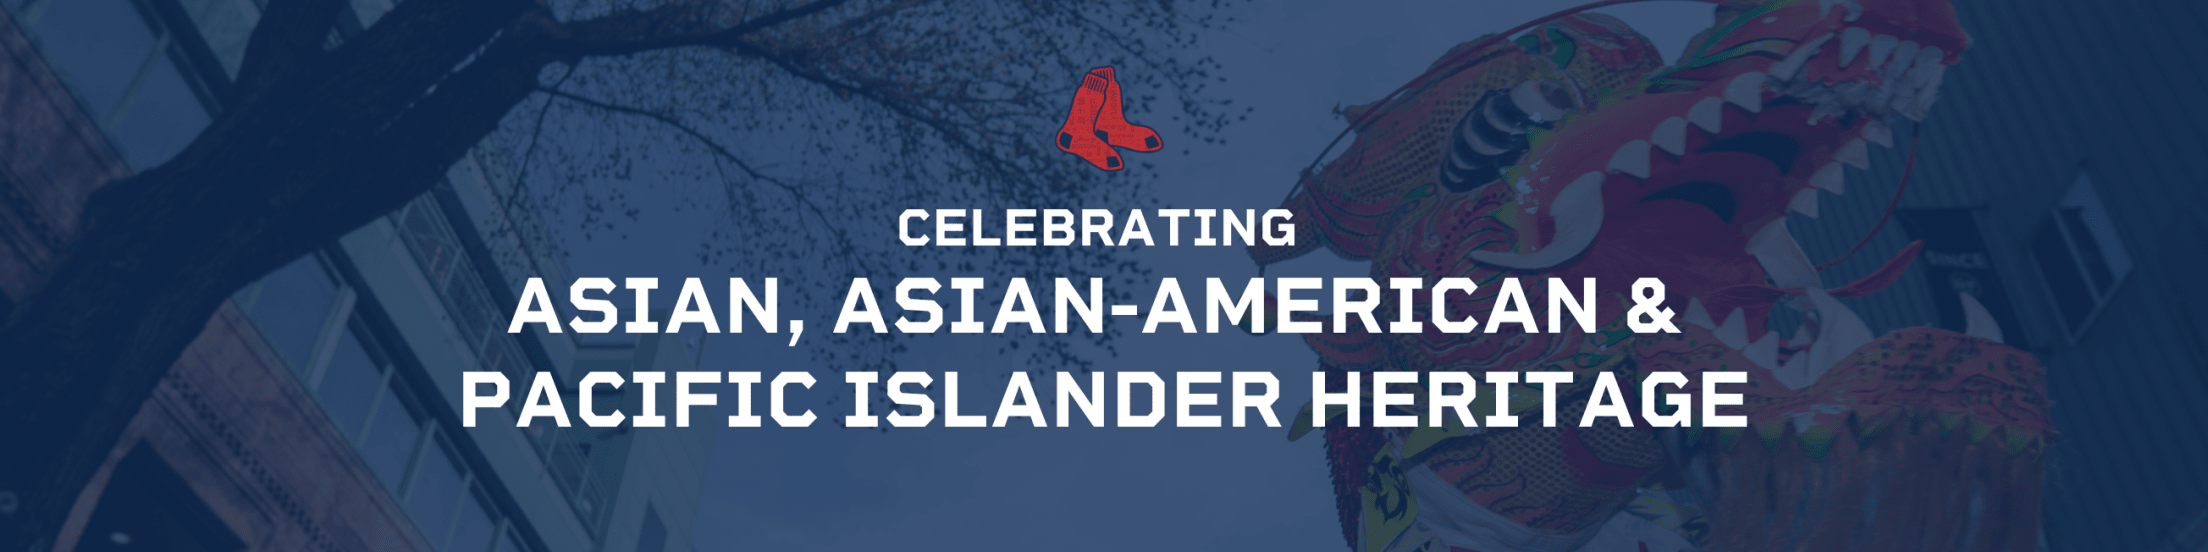 Major League Baseball Should Have an Asian Heritage Month